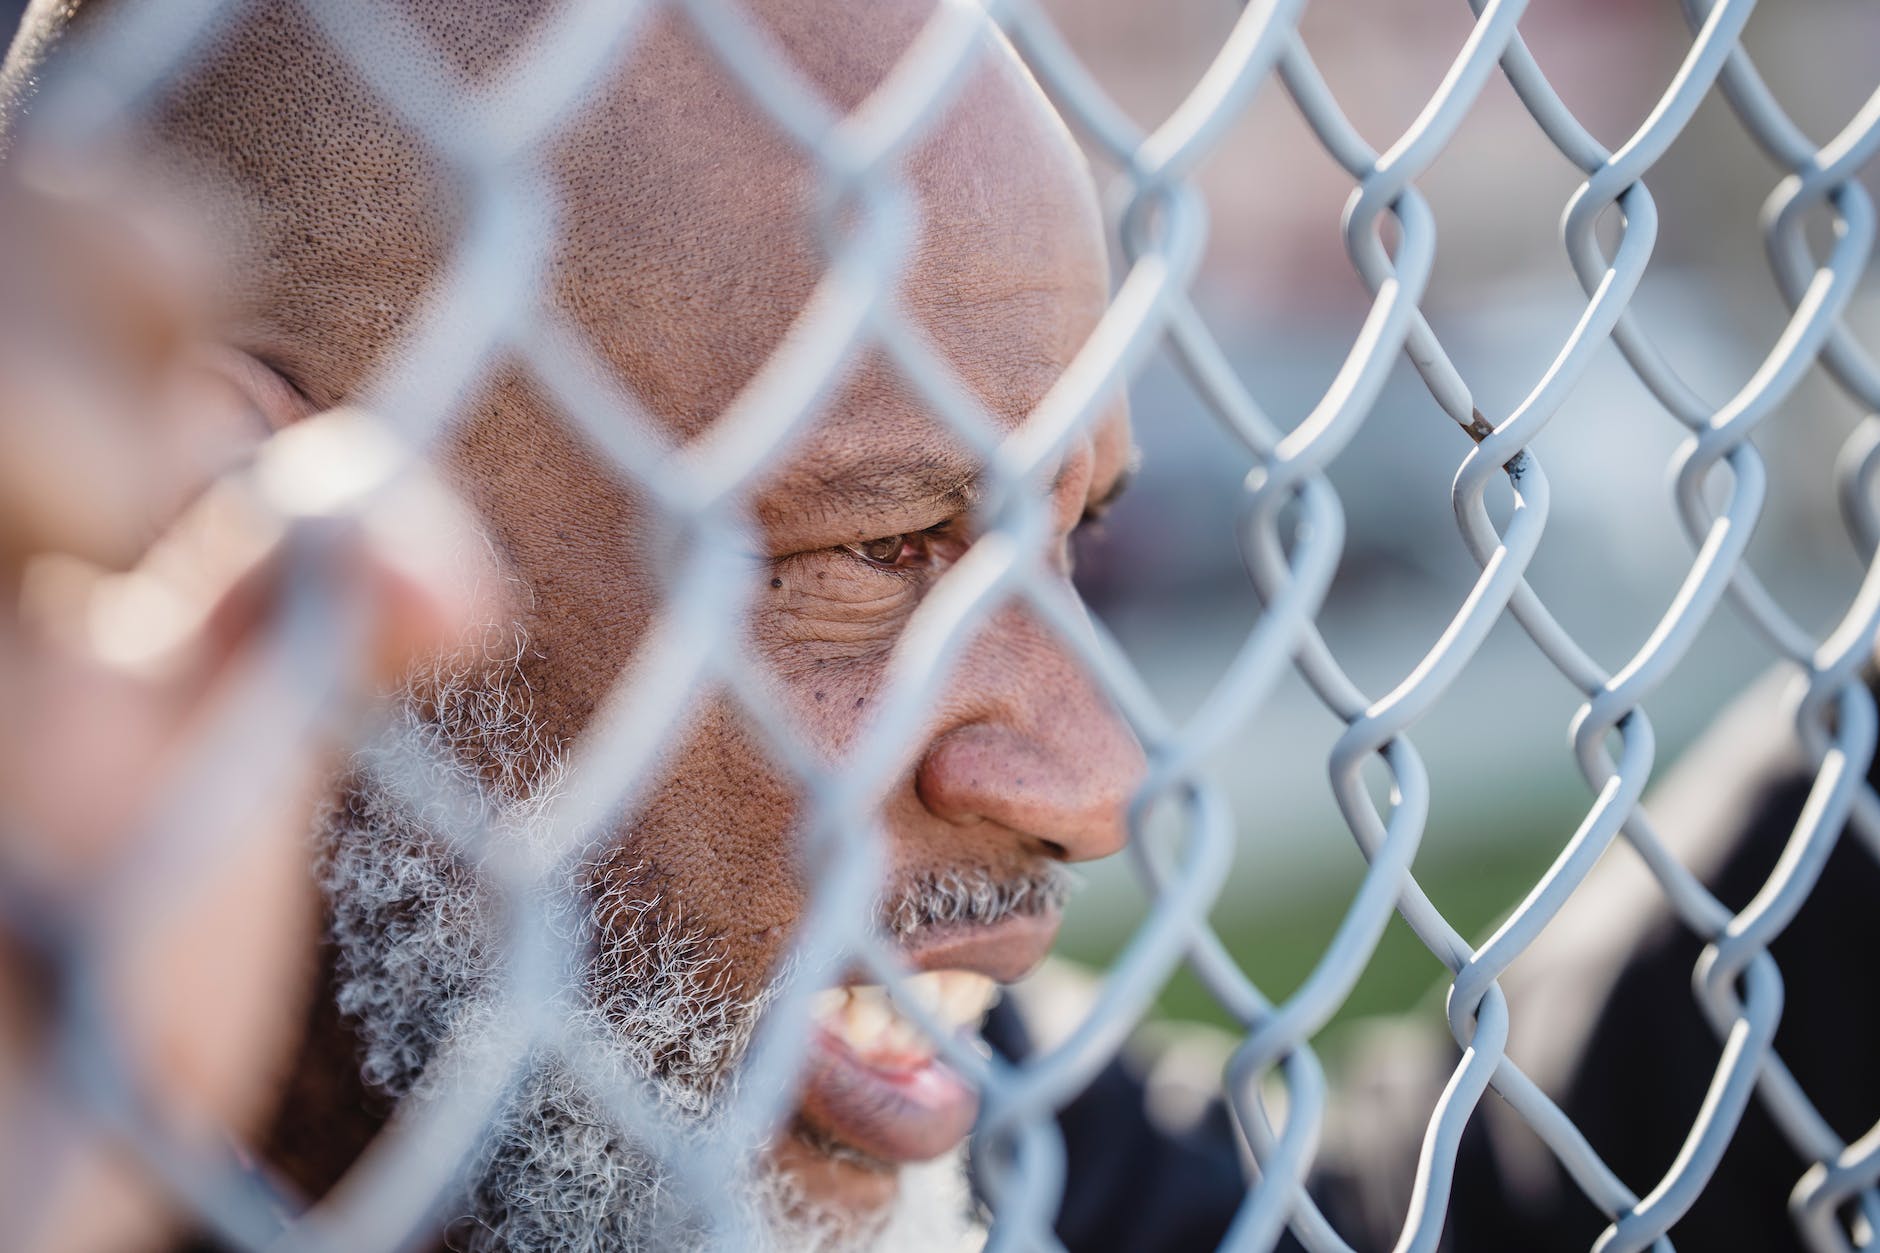 bearded man expressing anger behind net fence